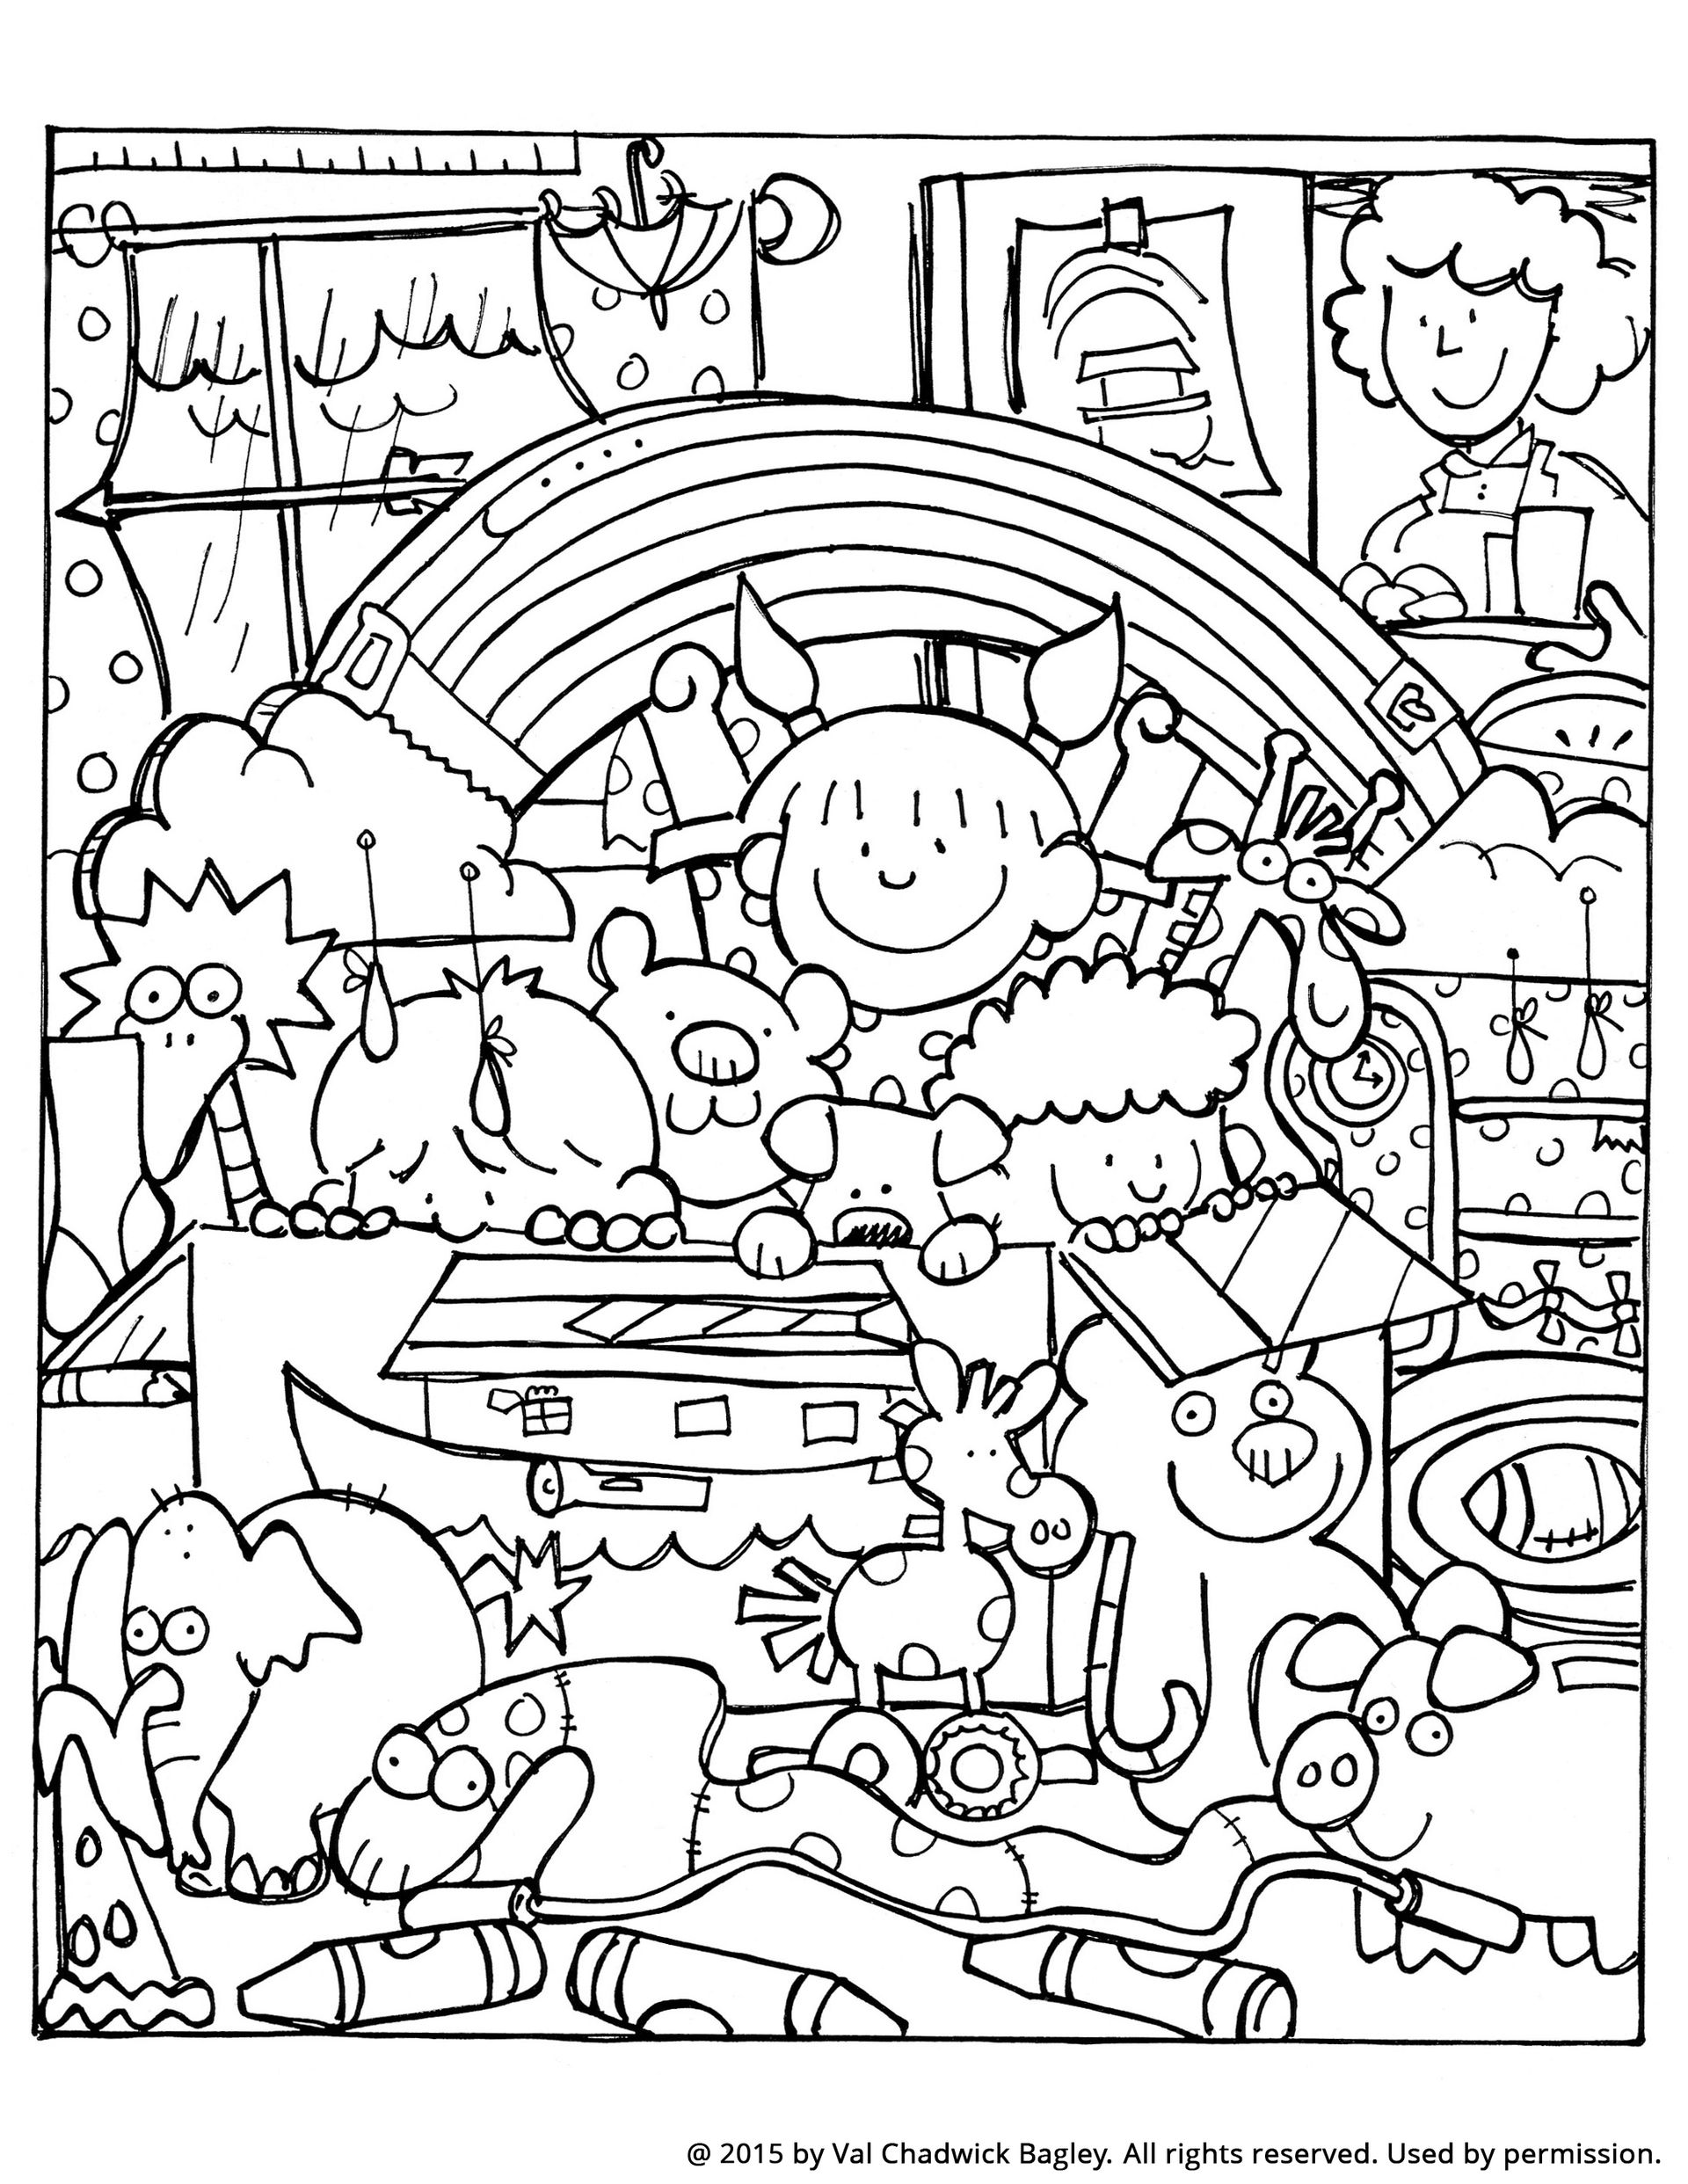 A coloring page of children at home playing Noah and the ark.